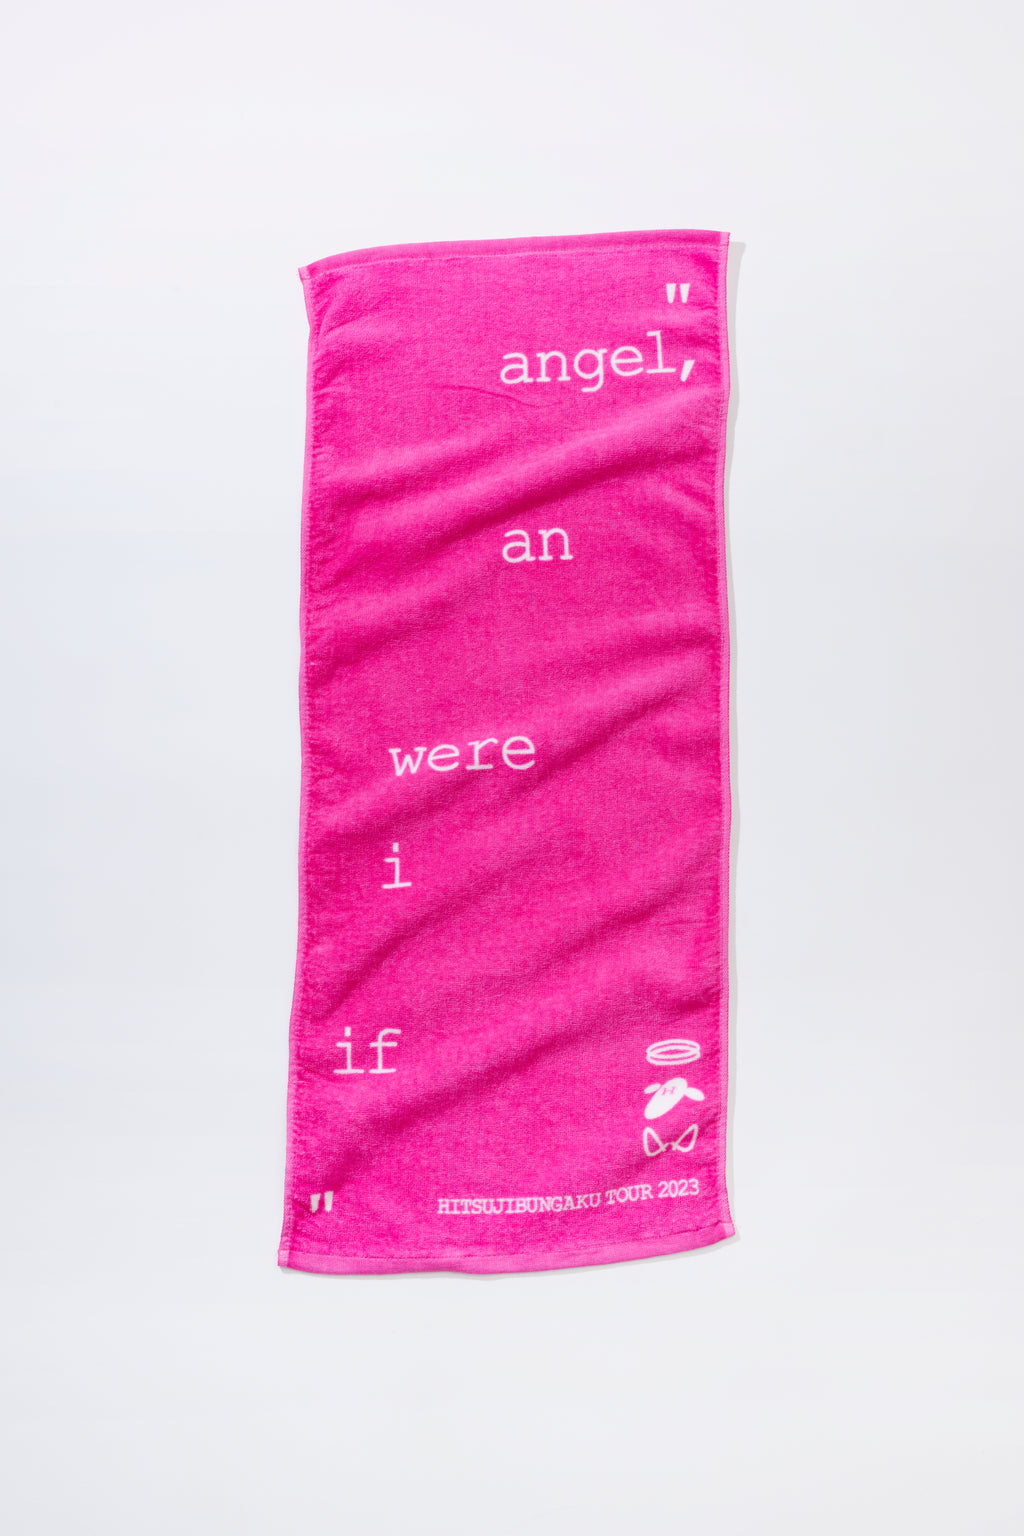 if i were an angel, フェイスタオル [PINK] – 羊文学 Official Store